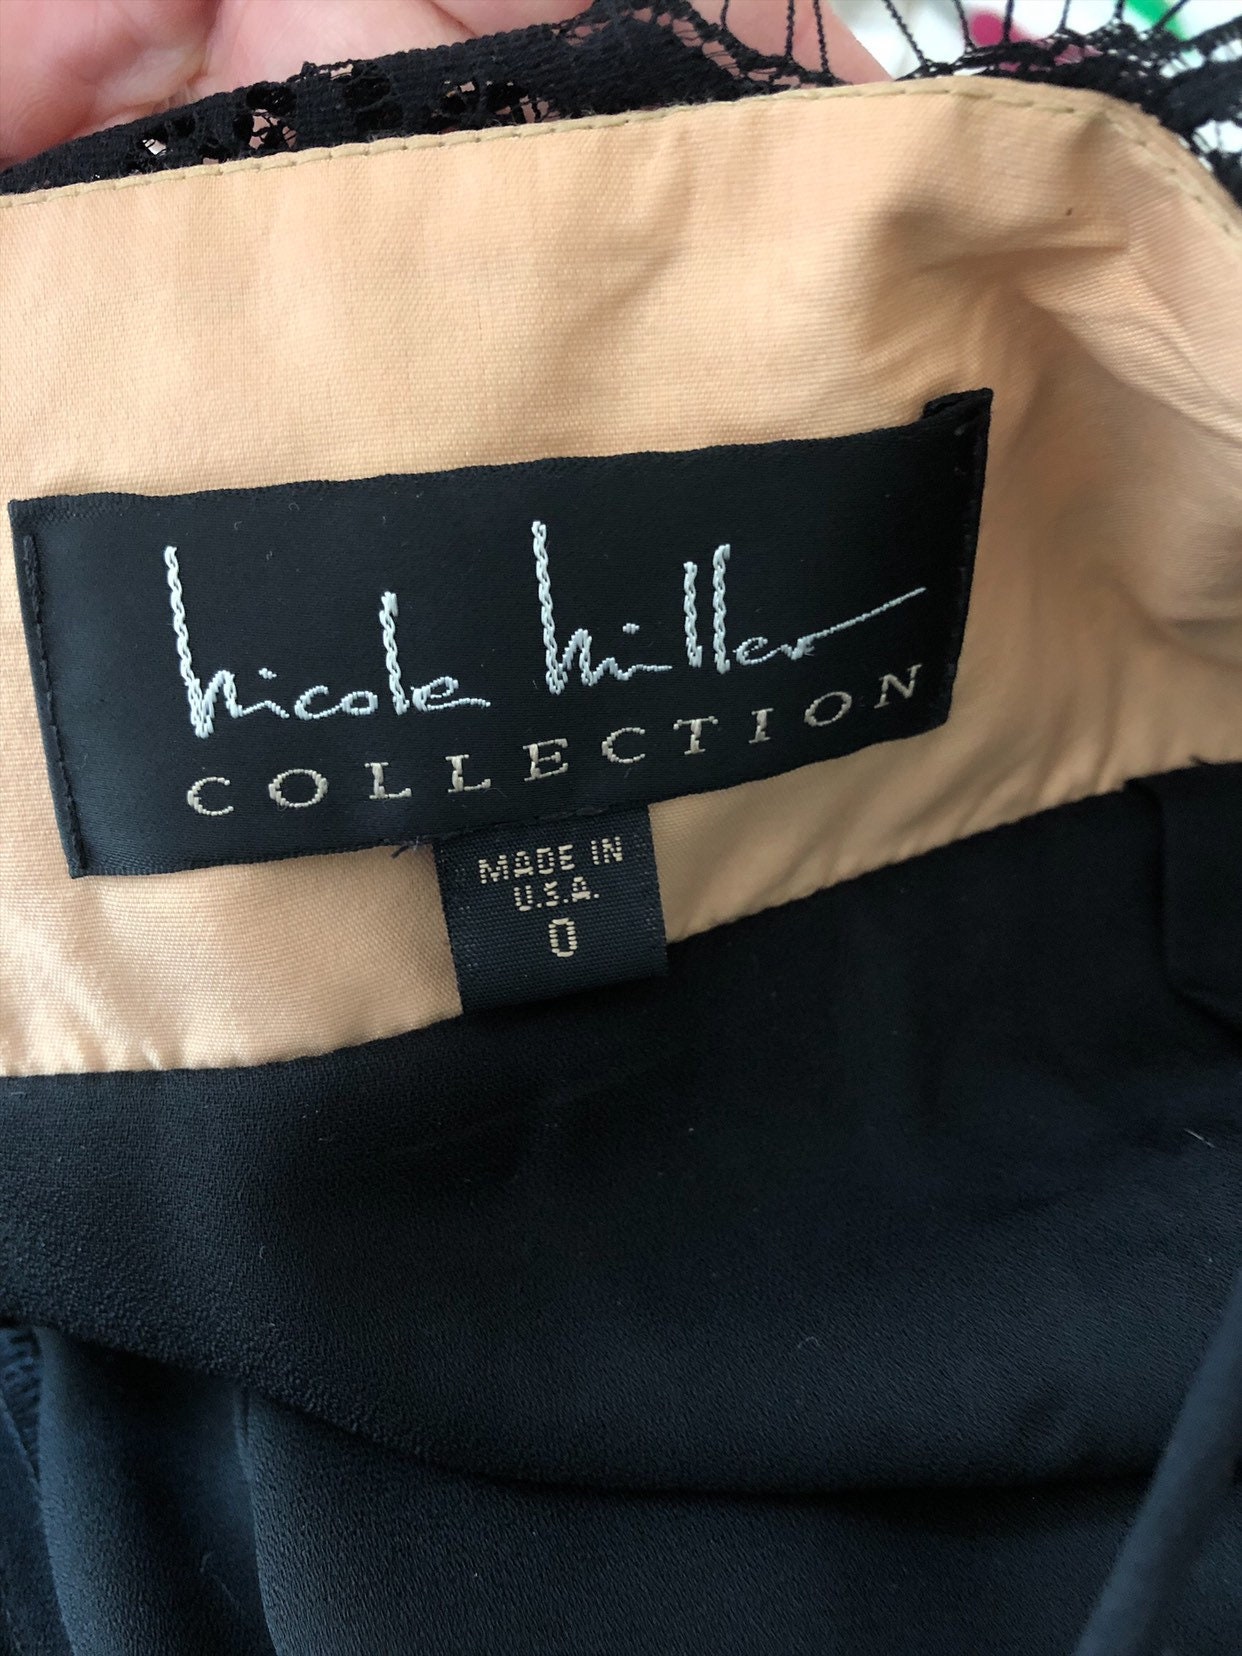 Chic sexy Nicole Miller Collection black and nude cocktail | Etsy